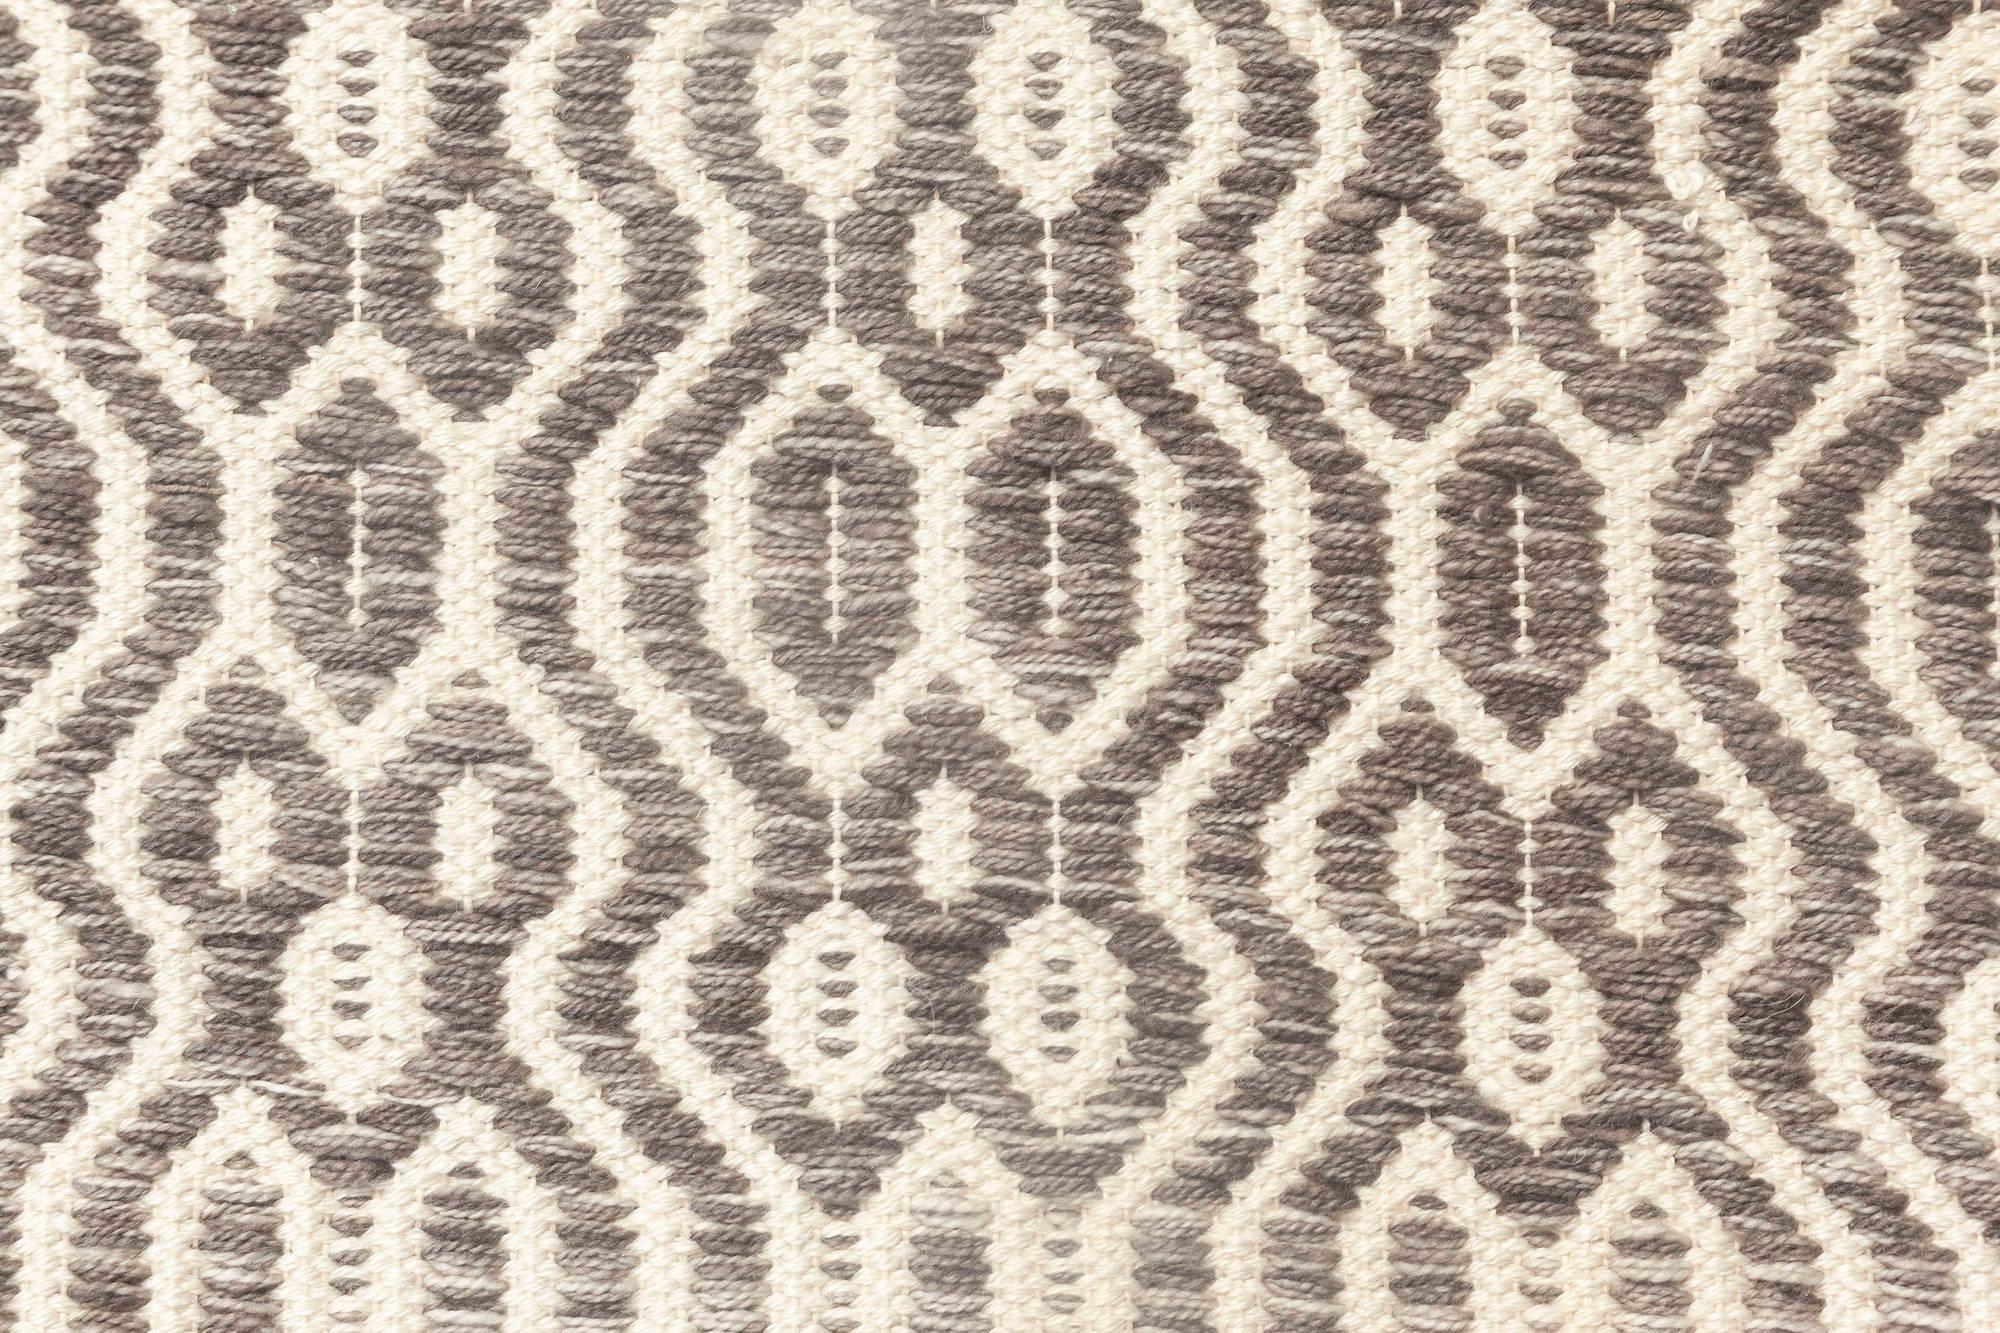 Contemporary gray and white flat-weave wool rug by Doris Leslie Blau
Size: 12'3